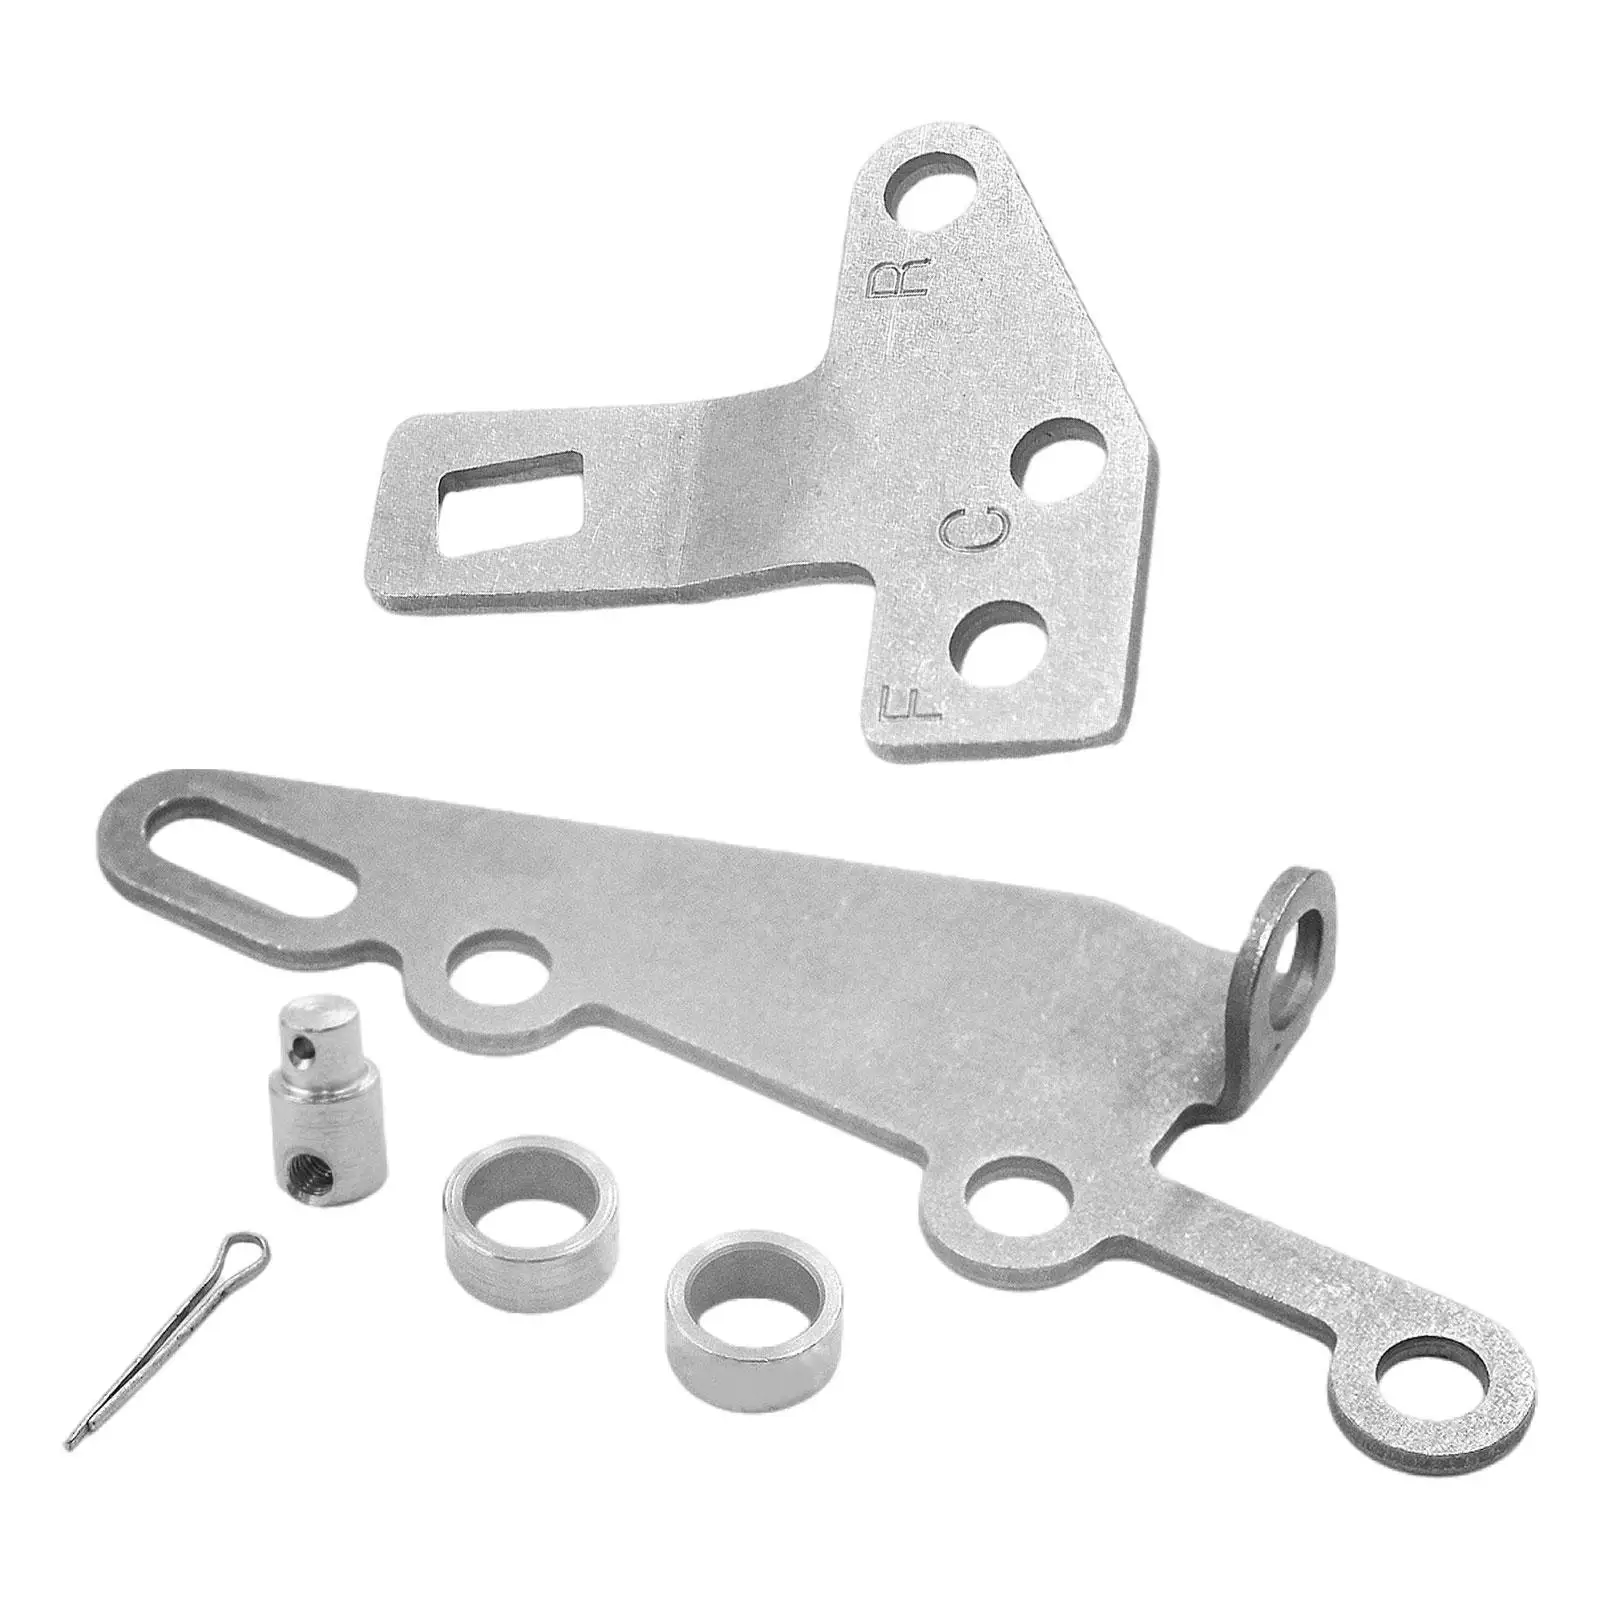 Bracket & Lever Kit Repair Parts 35498 for TH400 TH350 TH700-r4 TH200-4R H250/200 Professional